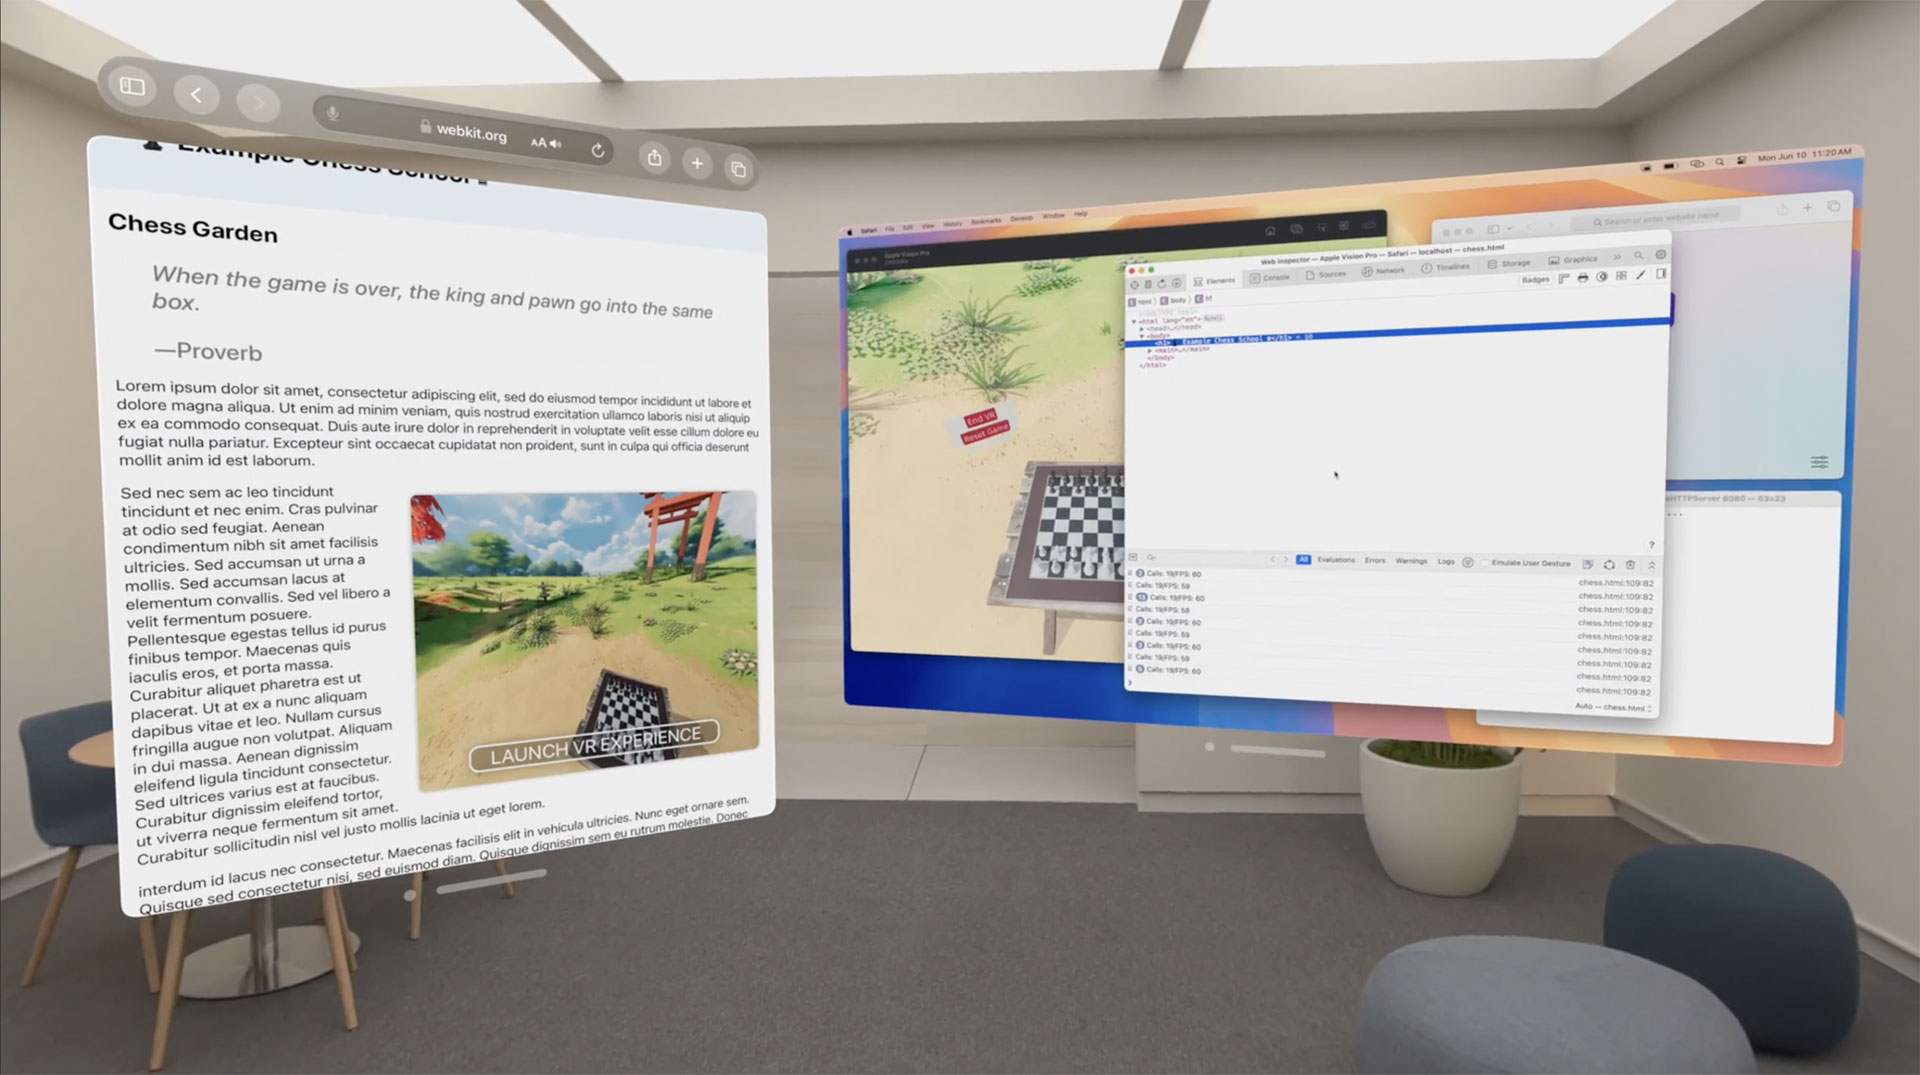 A view from inside Apple Vision Pro where two giant windows float in a real office. The first is a Safari window with the Chess Garden website showing. The second is macOS, with multiple windows inside the Mac window — working on developing the Chess Garden website using Safari Web Inspector and more. 